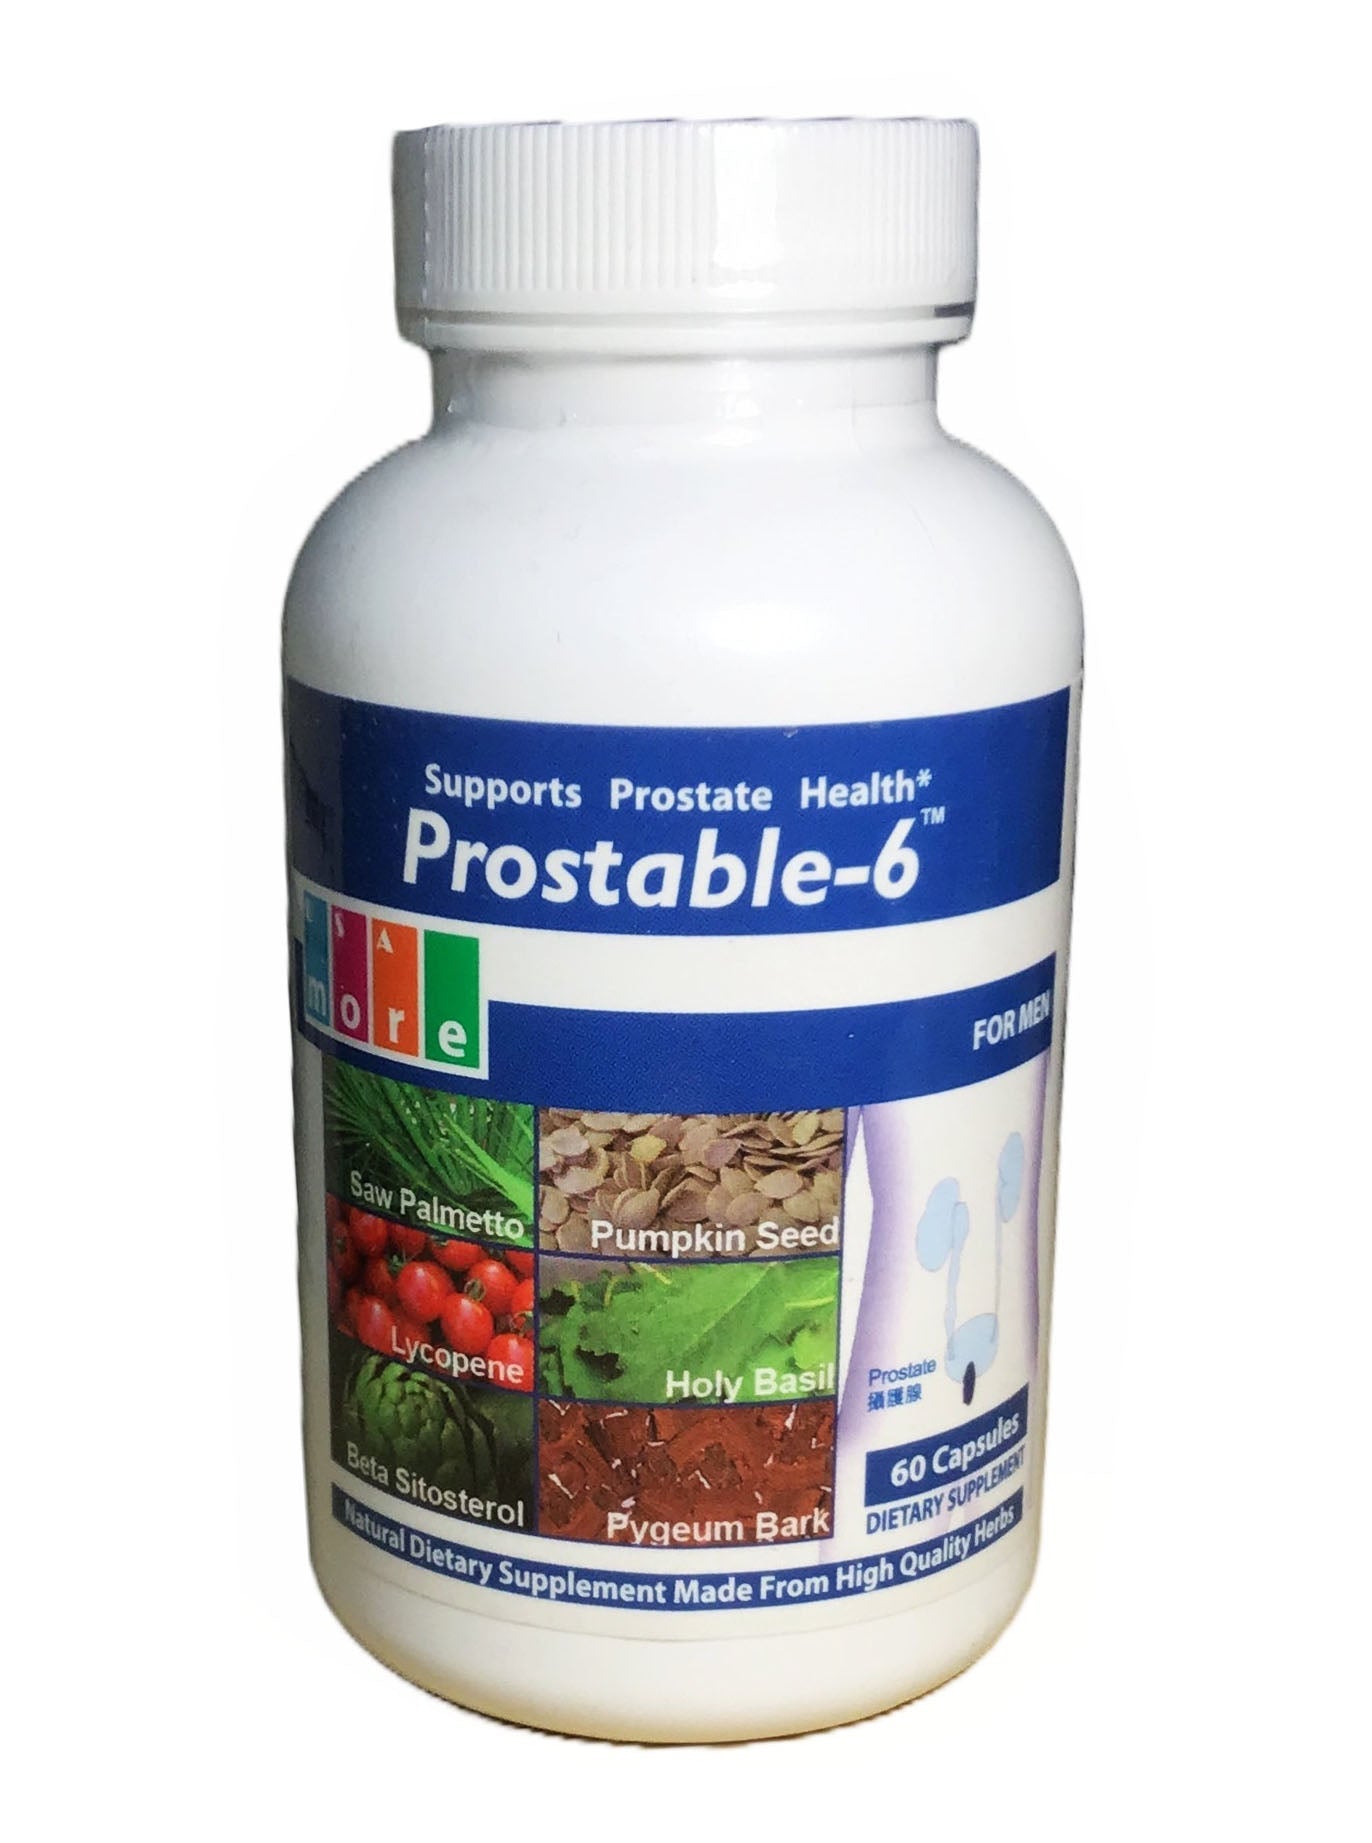 USA more Prostable-6 (60 Capsules) Supports Prostate Health For Men